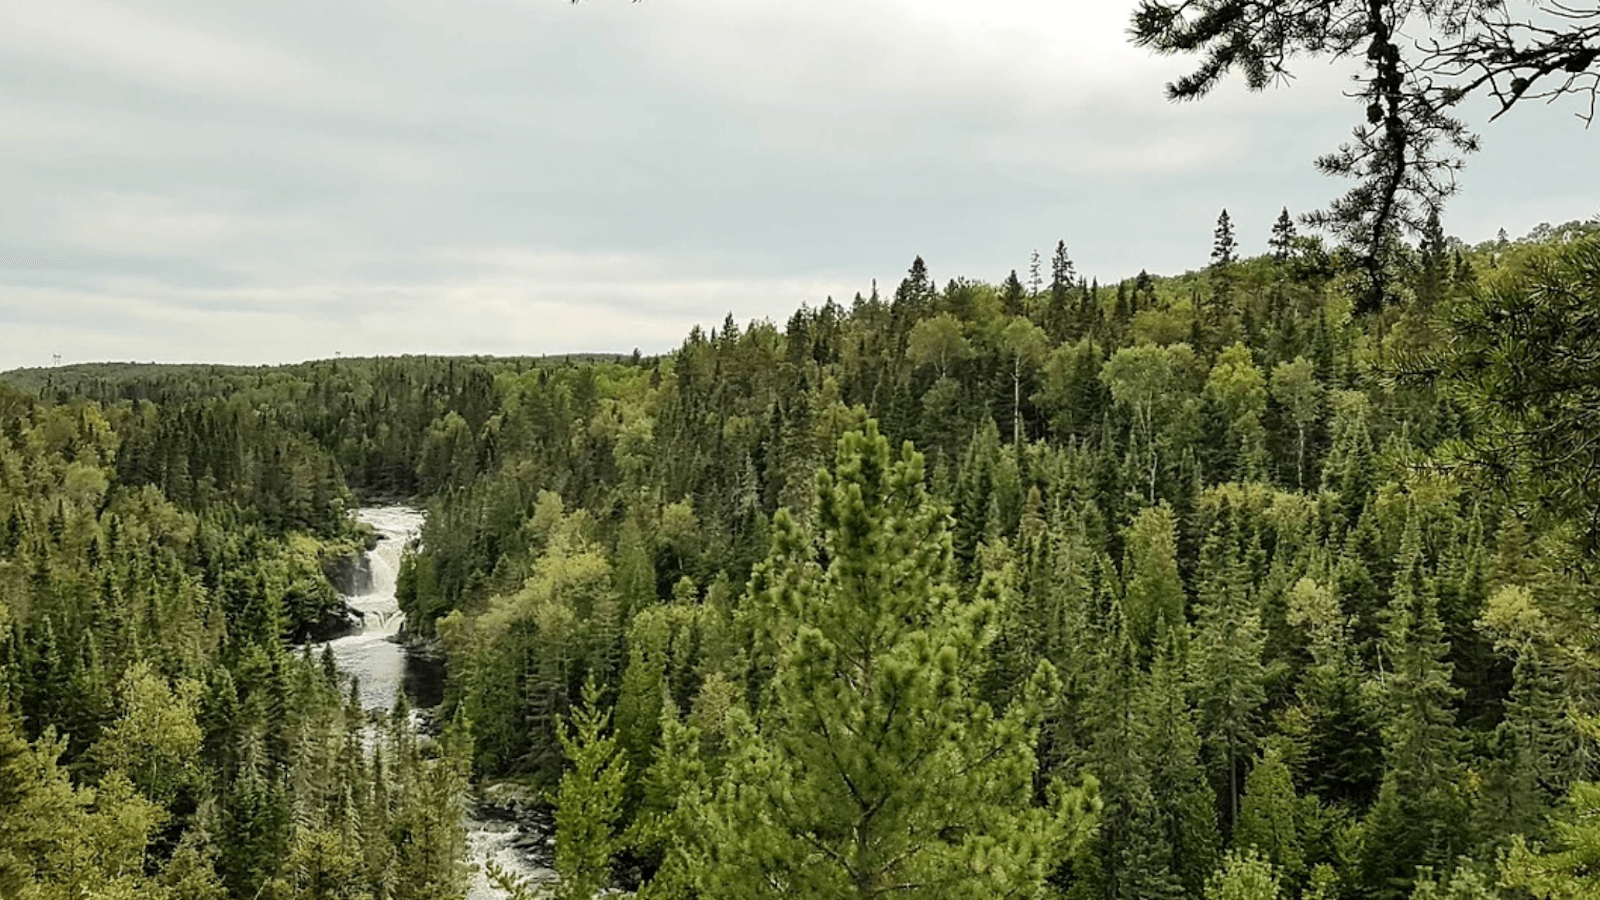 River running through green boreal forest with overcast skies